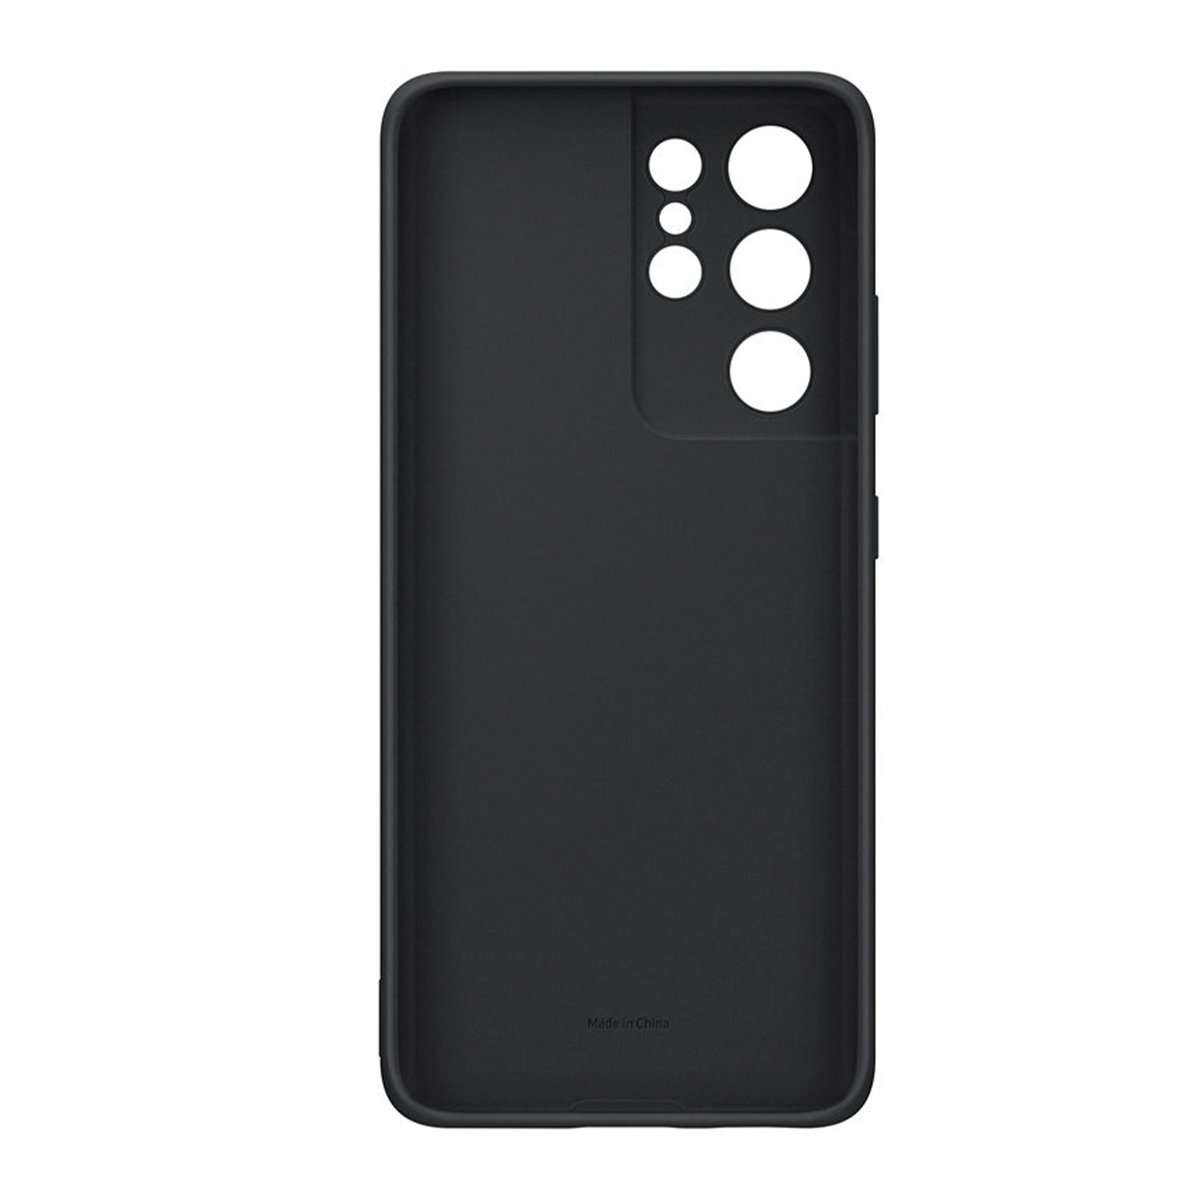 Samsung Galaxy S21 Ultra Silicone Cover with S Pen PG998 Black